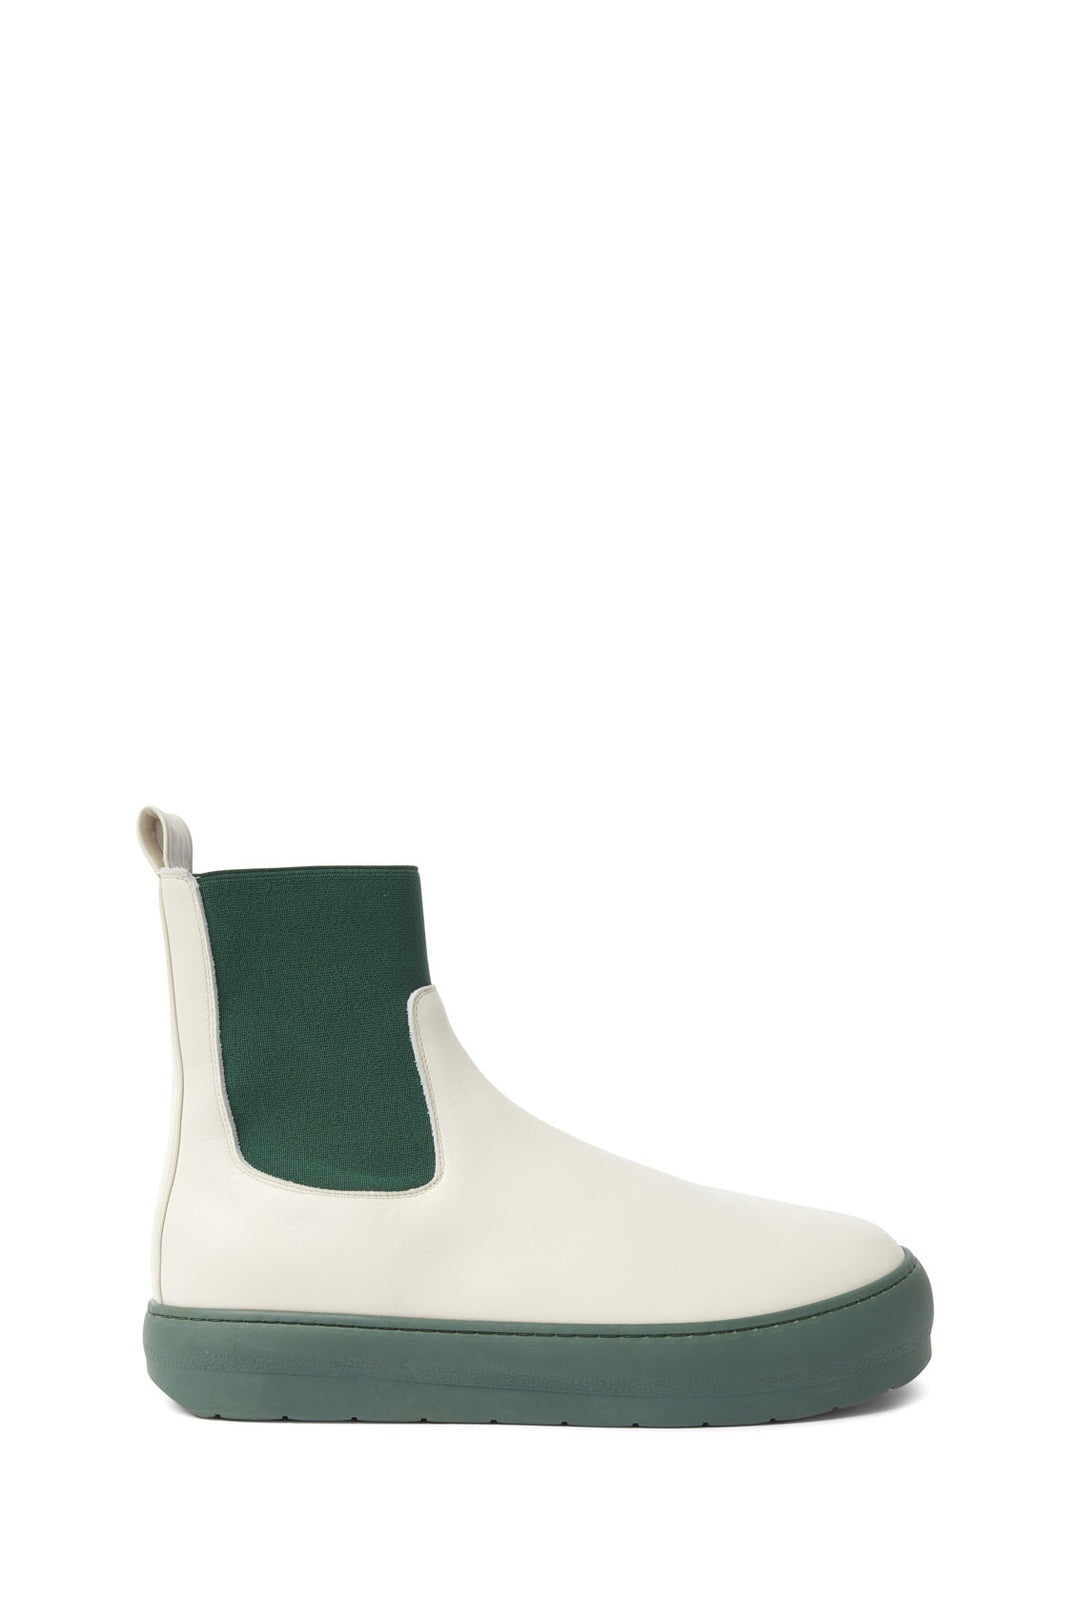 DREAMY ANKLE BOOTS / leather / cream & green - 2